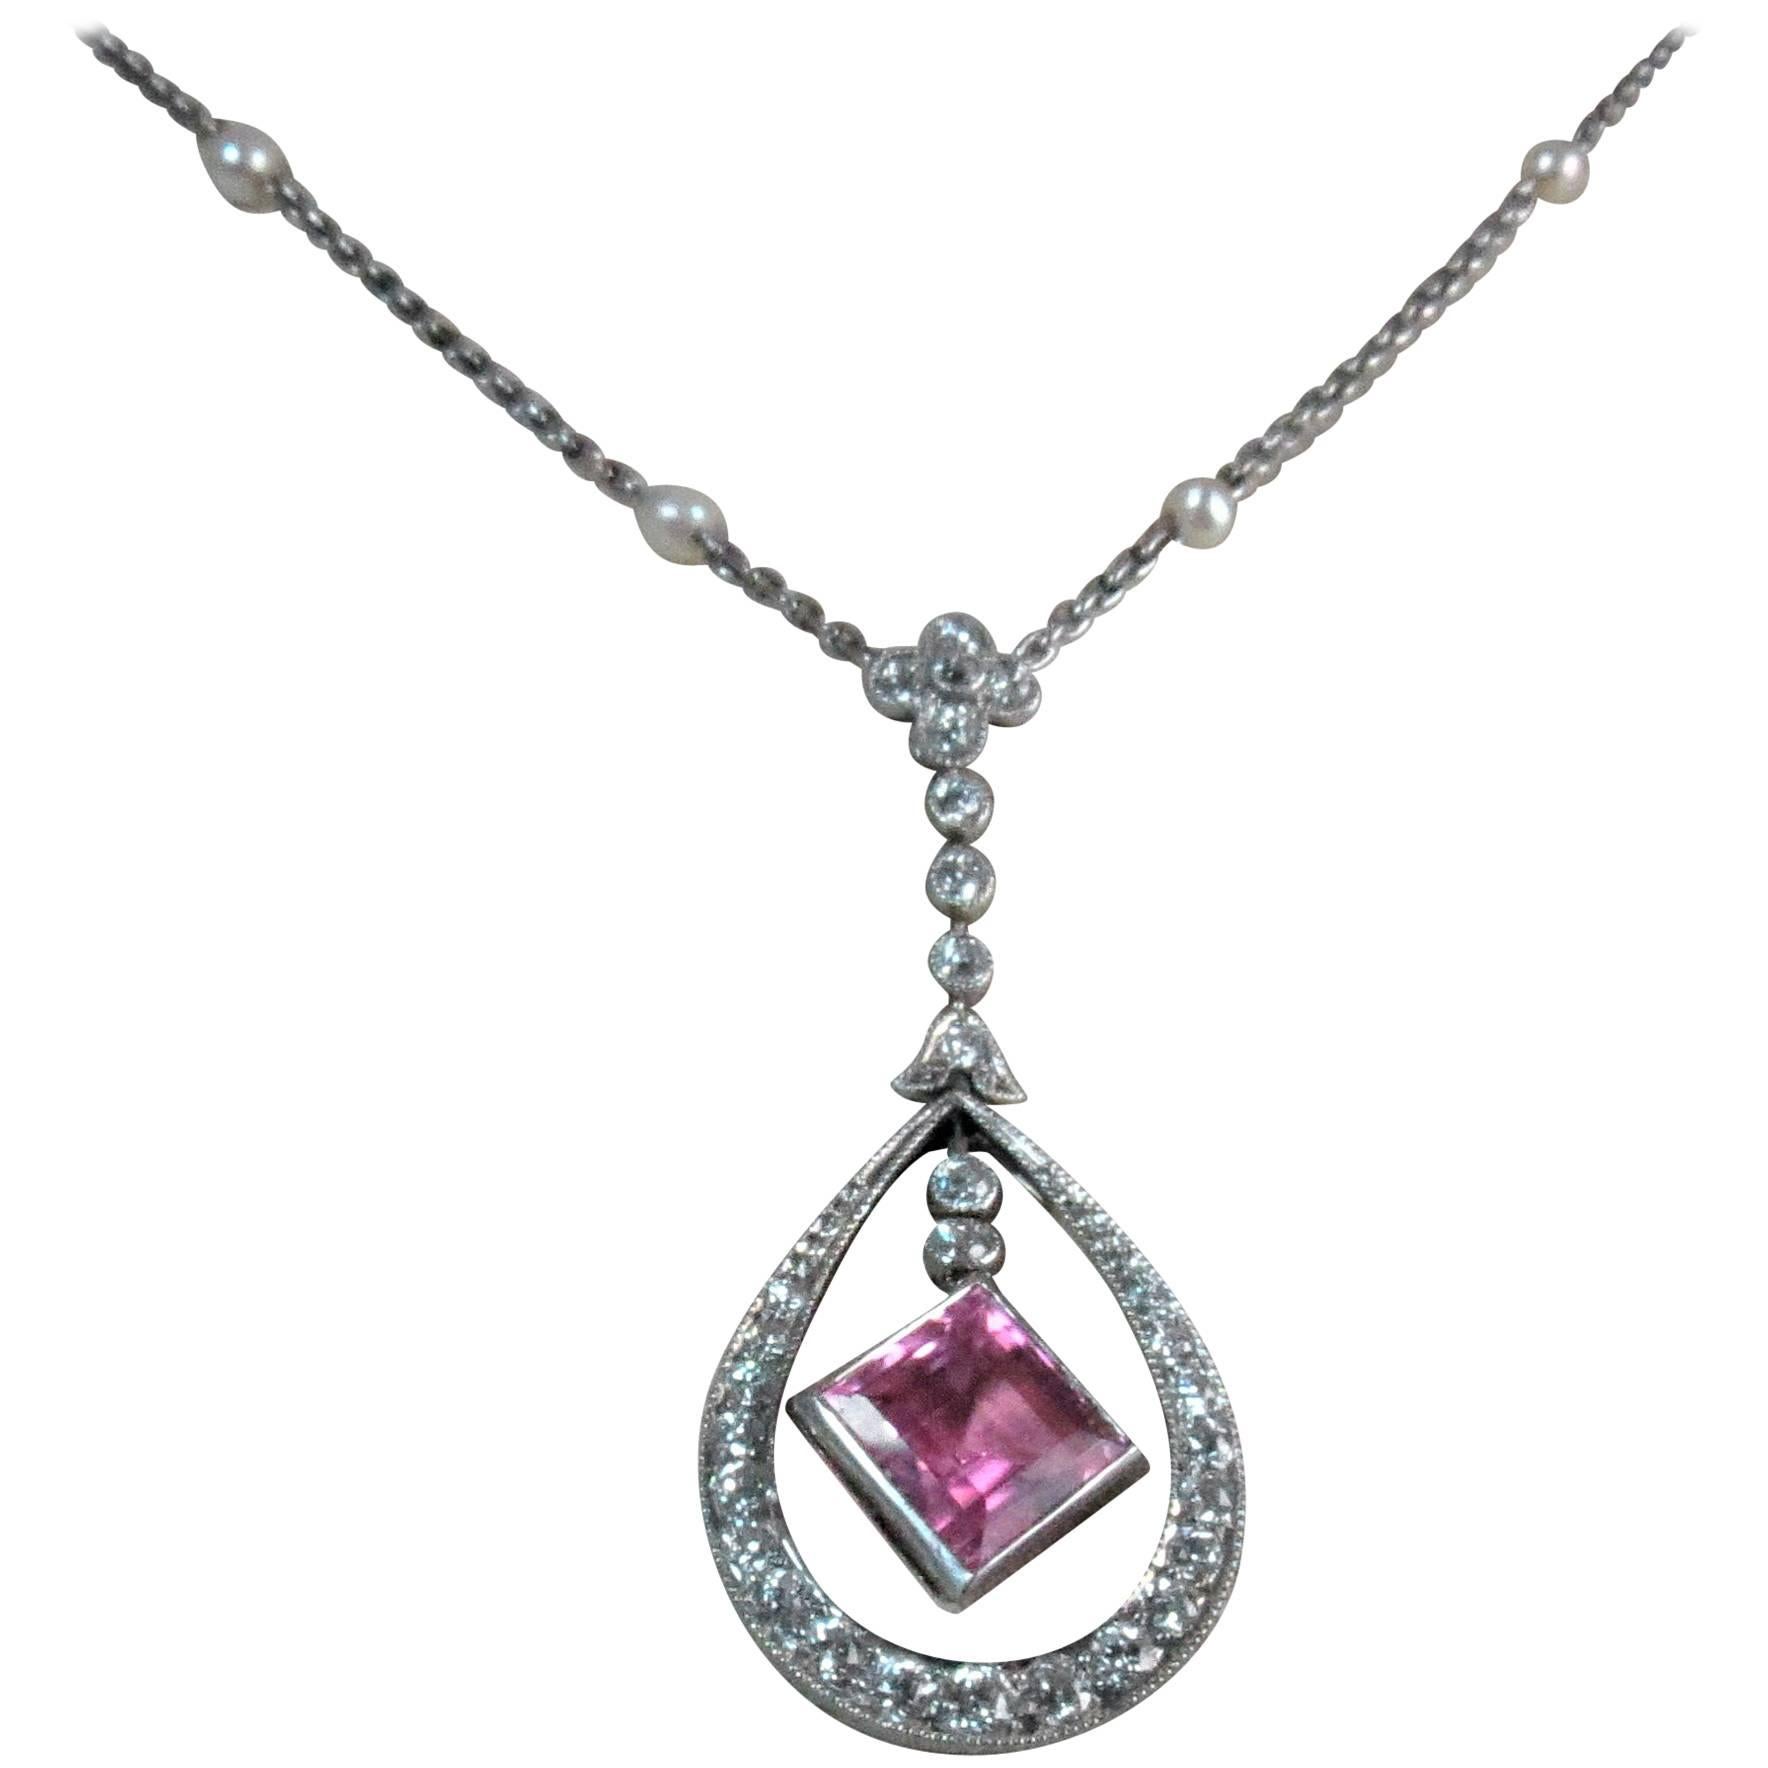 18 Karat Gold Diamond and Pink Tourmaline Pendant Suspended from Pearl Chain